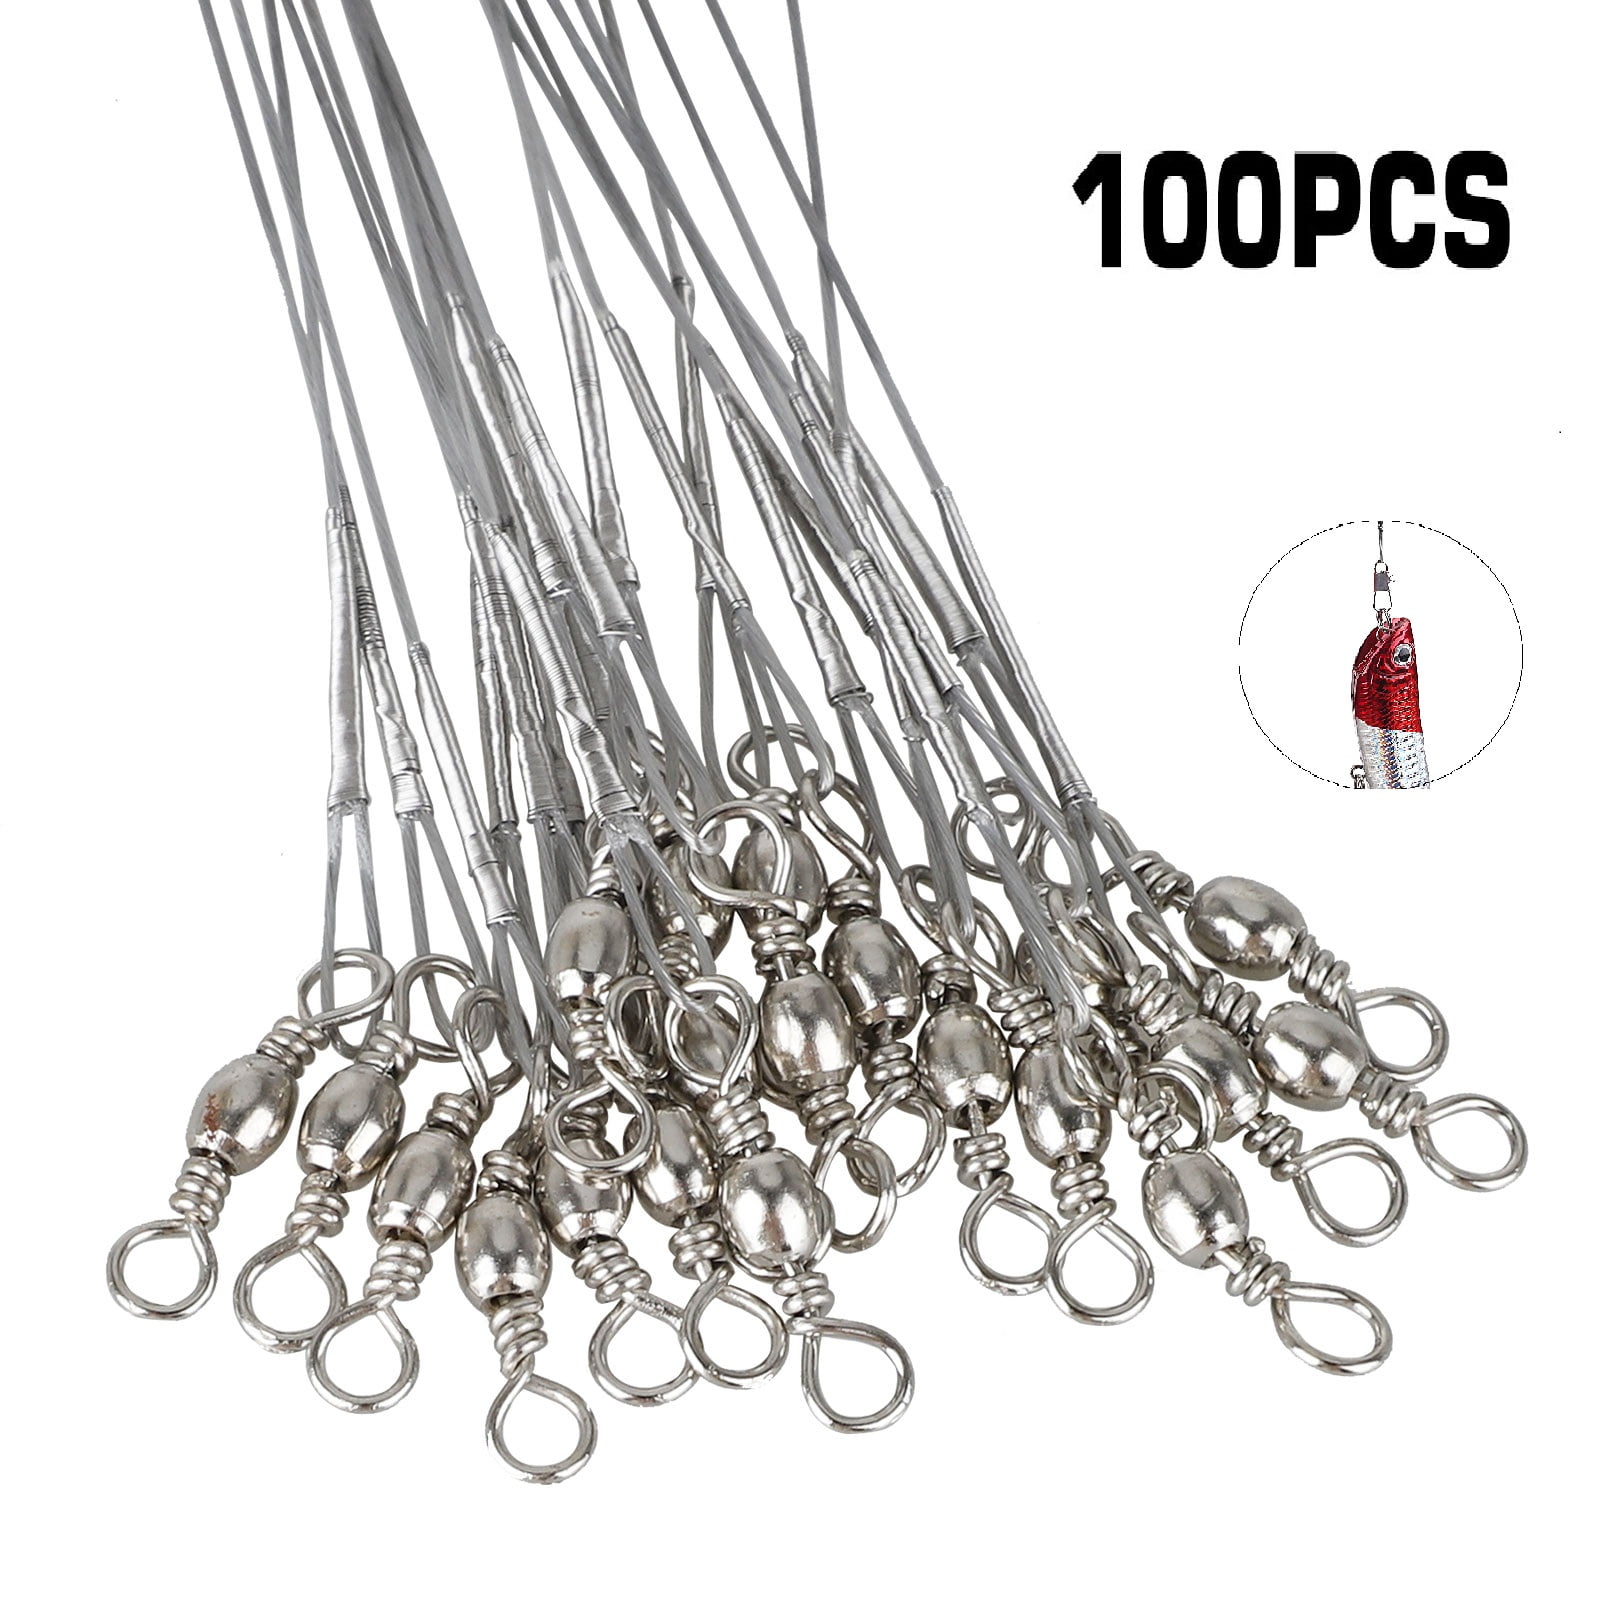 TEST W/SWIVELS ON BOTH ENDS 15 STAINLESS STEEL WIRE SPINNER LEADER 24" 100 LBS 